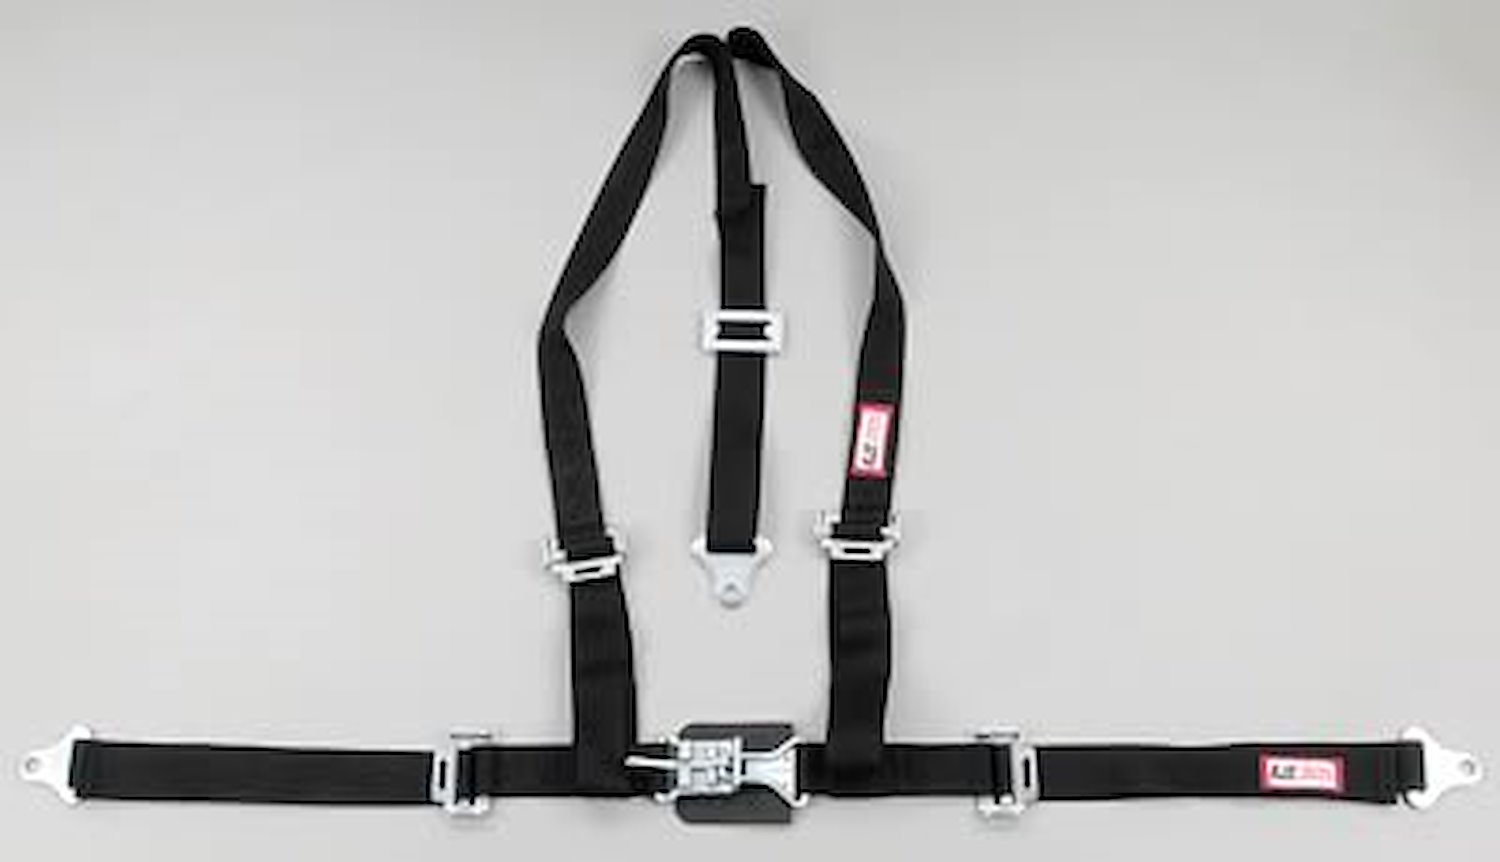 NON-SFI L&L HARNESS 2 PULL UP Lap Belt SEWN IN 2 S.H. INDIVIDUAL FLOOR Mount ALL WRAP ENDS BLUE